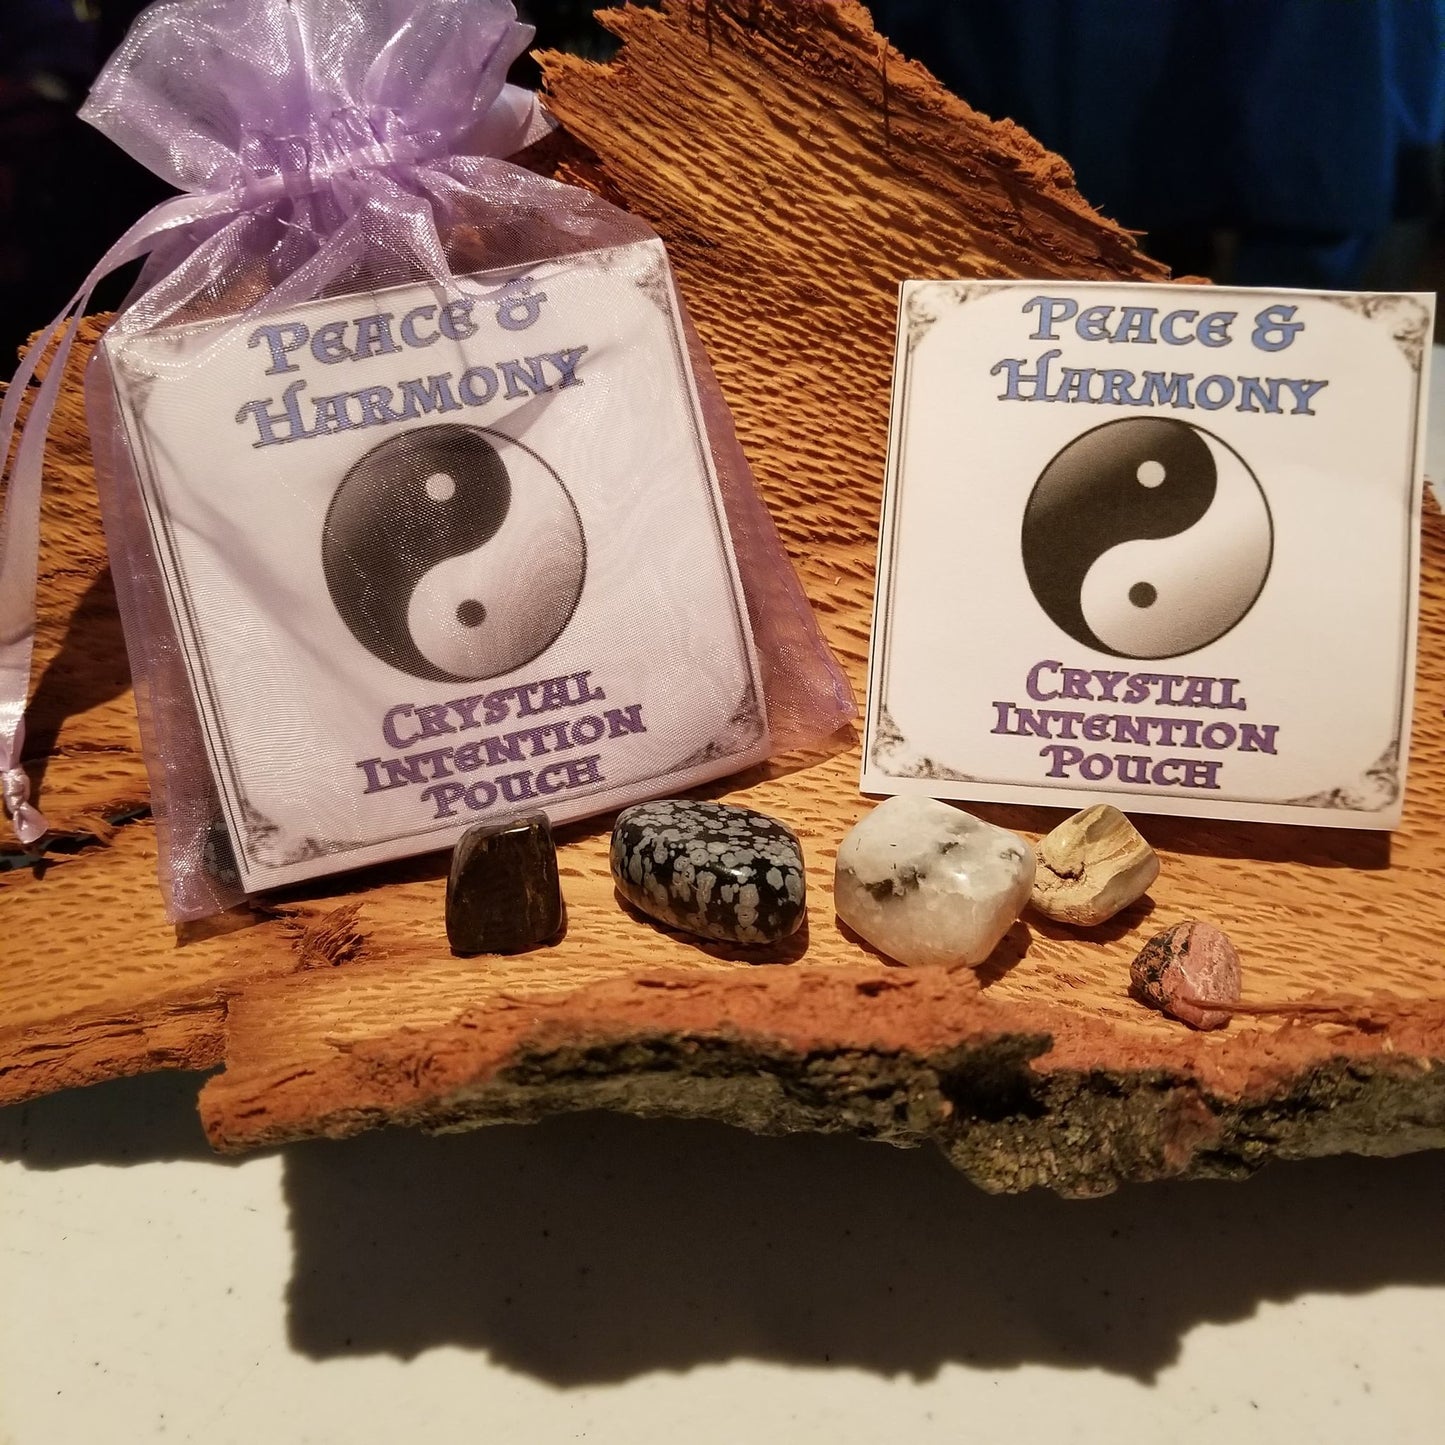 Crystal Intention Pouch, Peace & Harmony